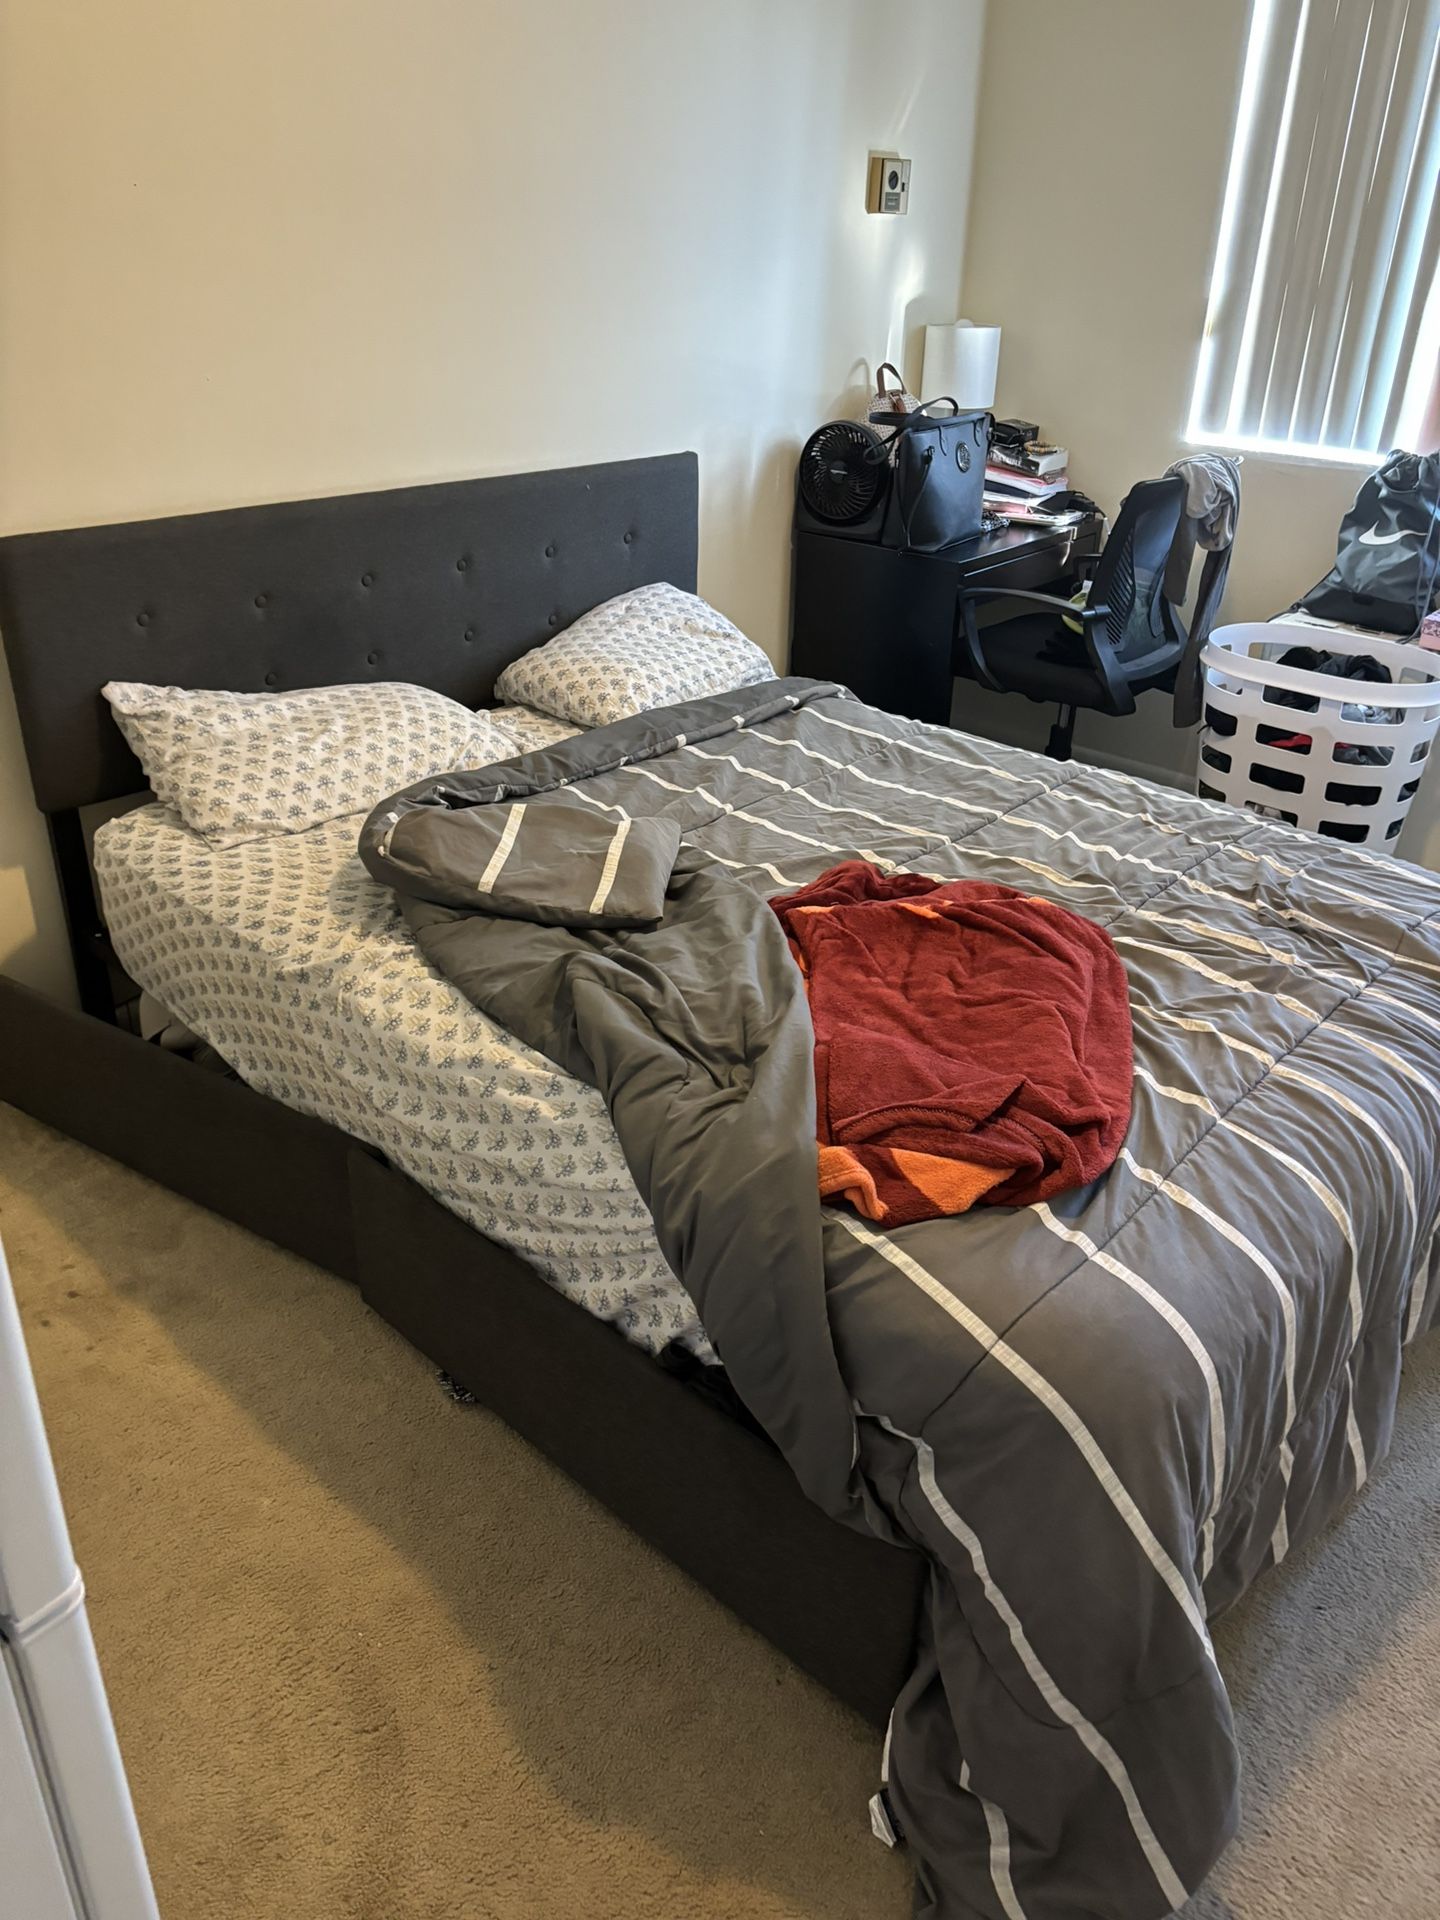 Queen Size Bed Frame, Mattress, Reading Table And Chair 